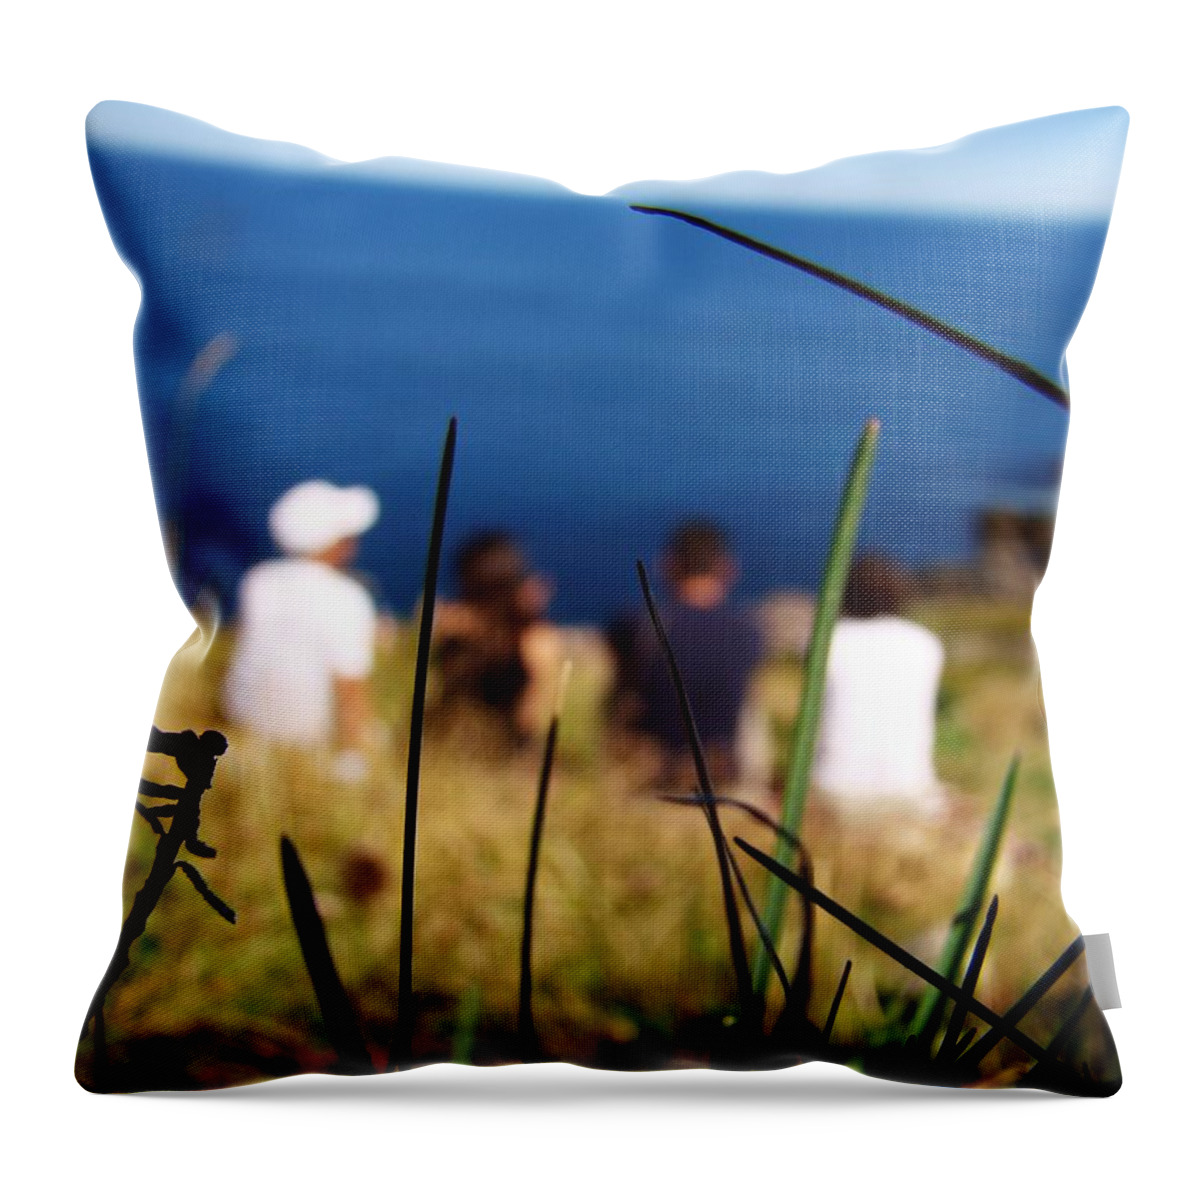 Friends Throw Pillow featuring the photograph Distant Memories by Zinvolle Art